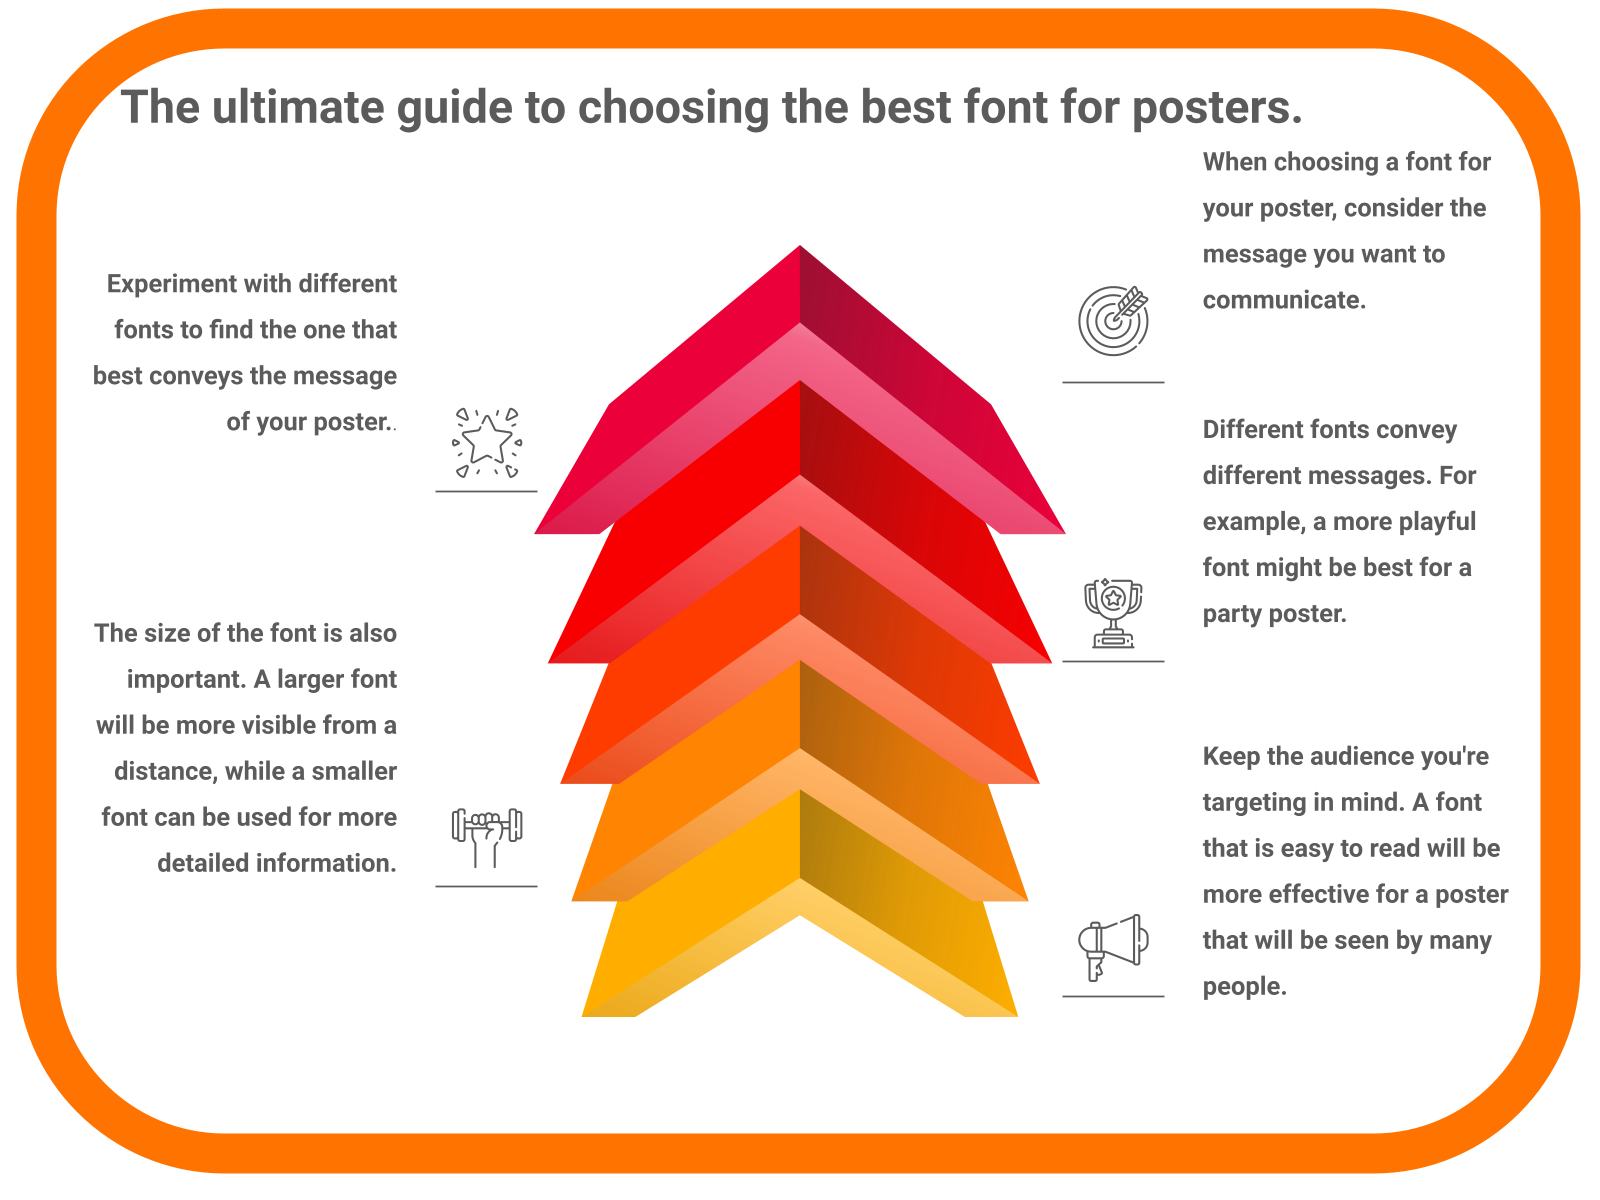 The ultimate guide to choosing the best font for posters.